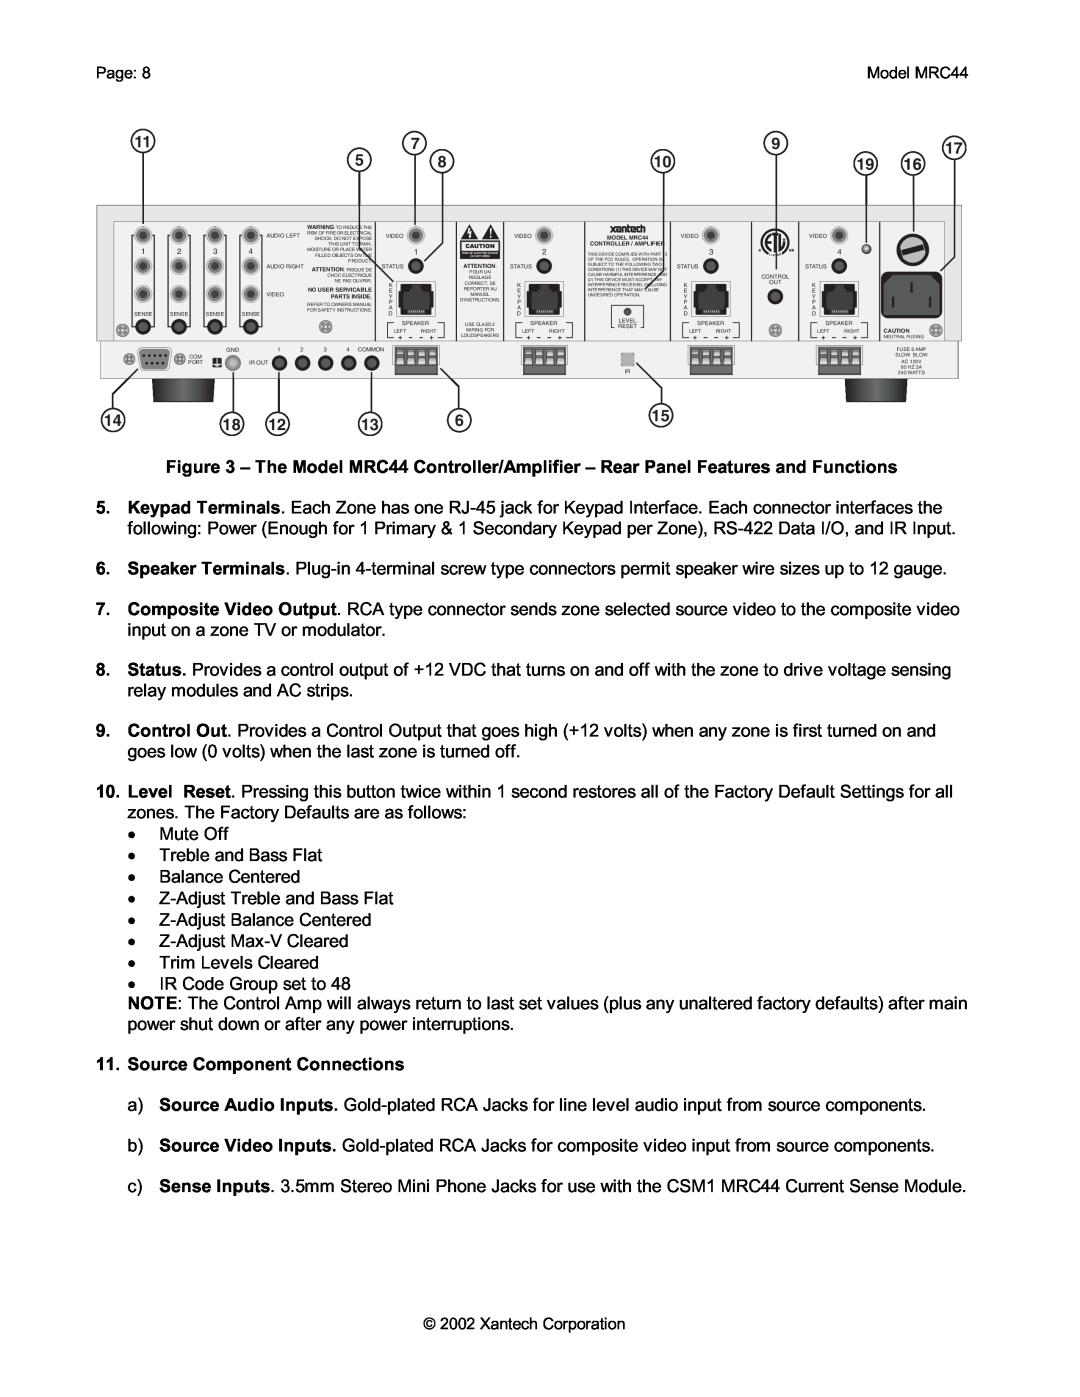 Xantech MRC44 installation instructions Source Component Connections 